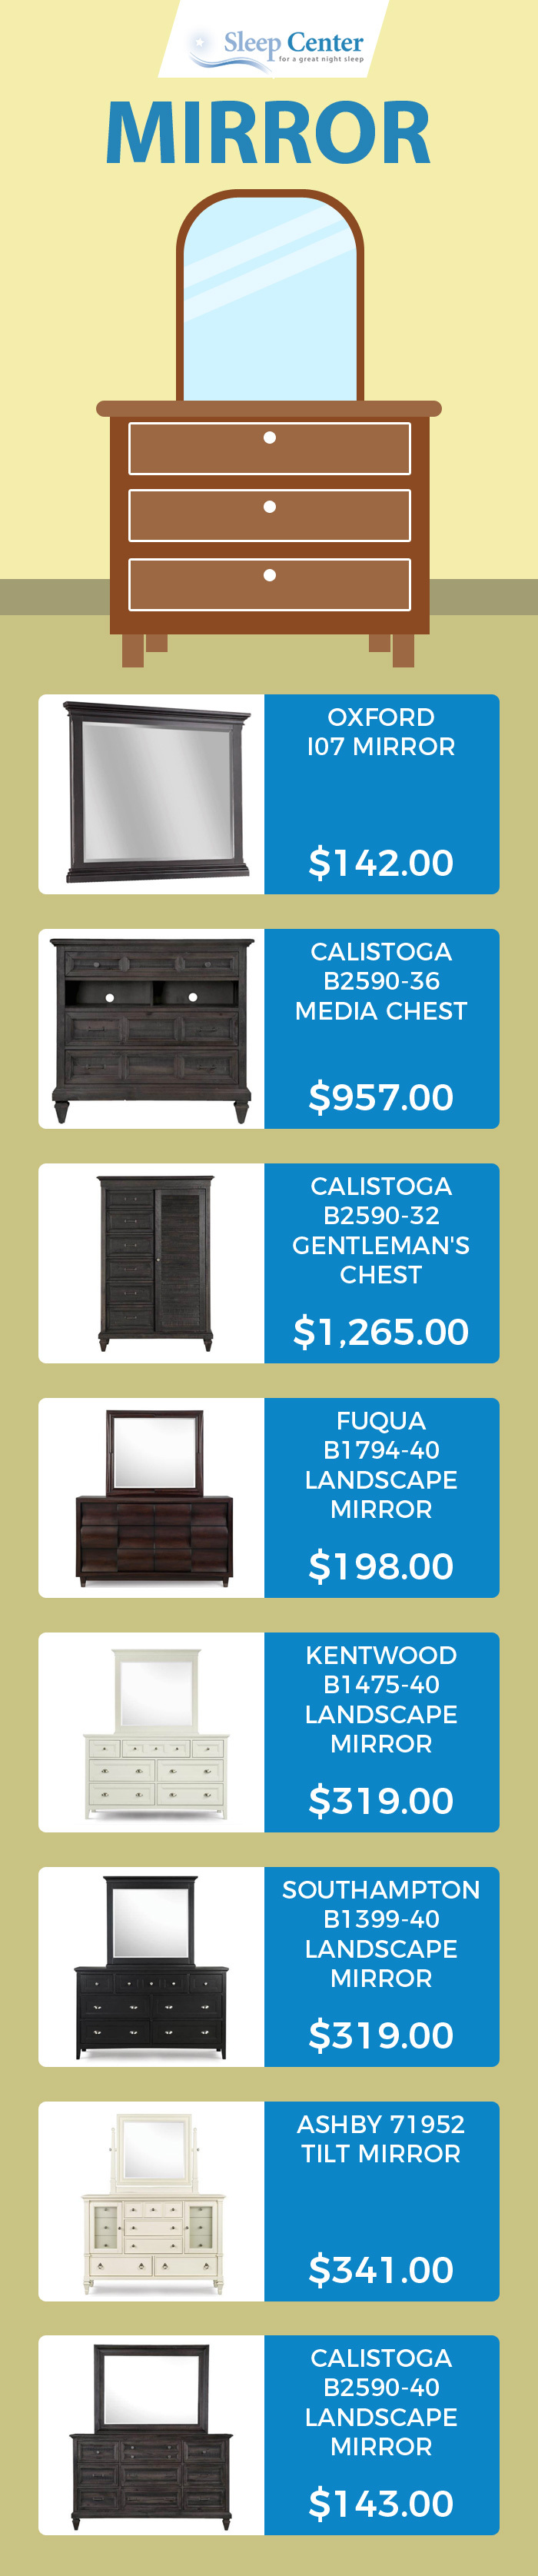 Sleep Center - A Trusted Store to Buy Bedroom Mirrors in Sacramento